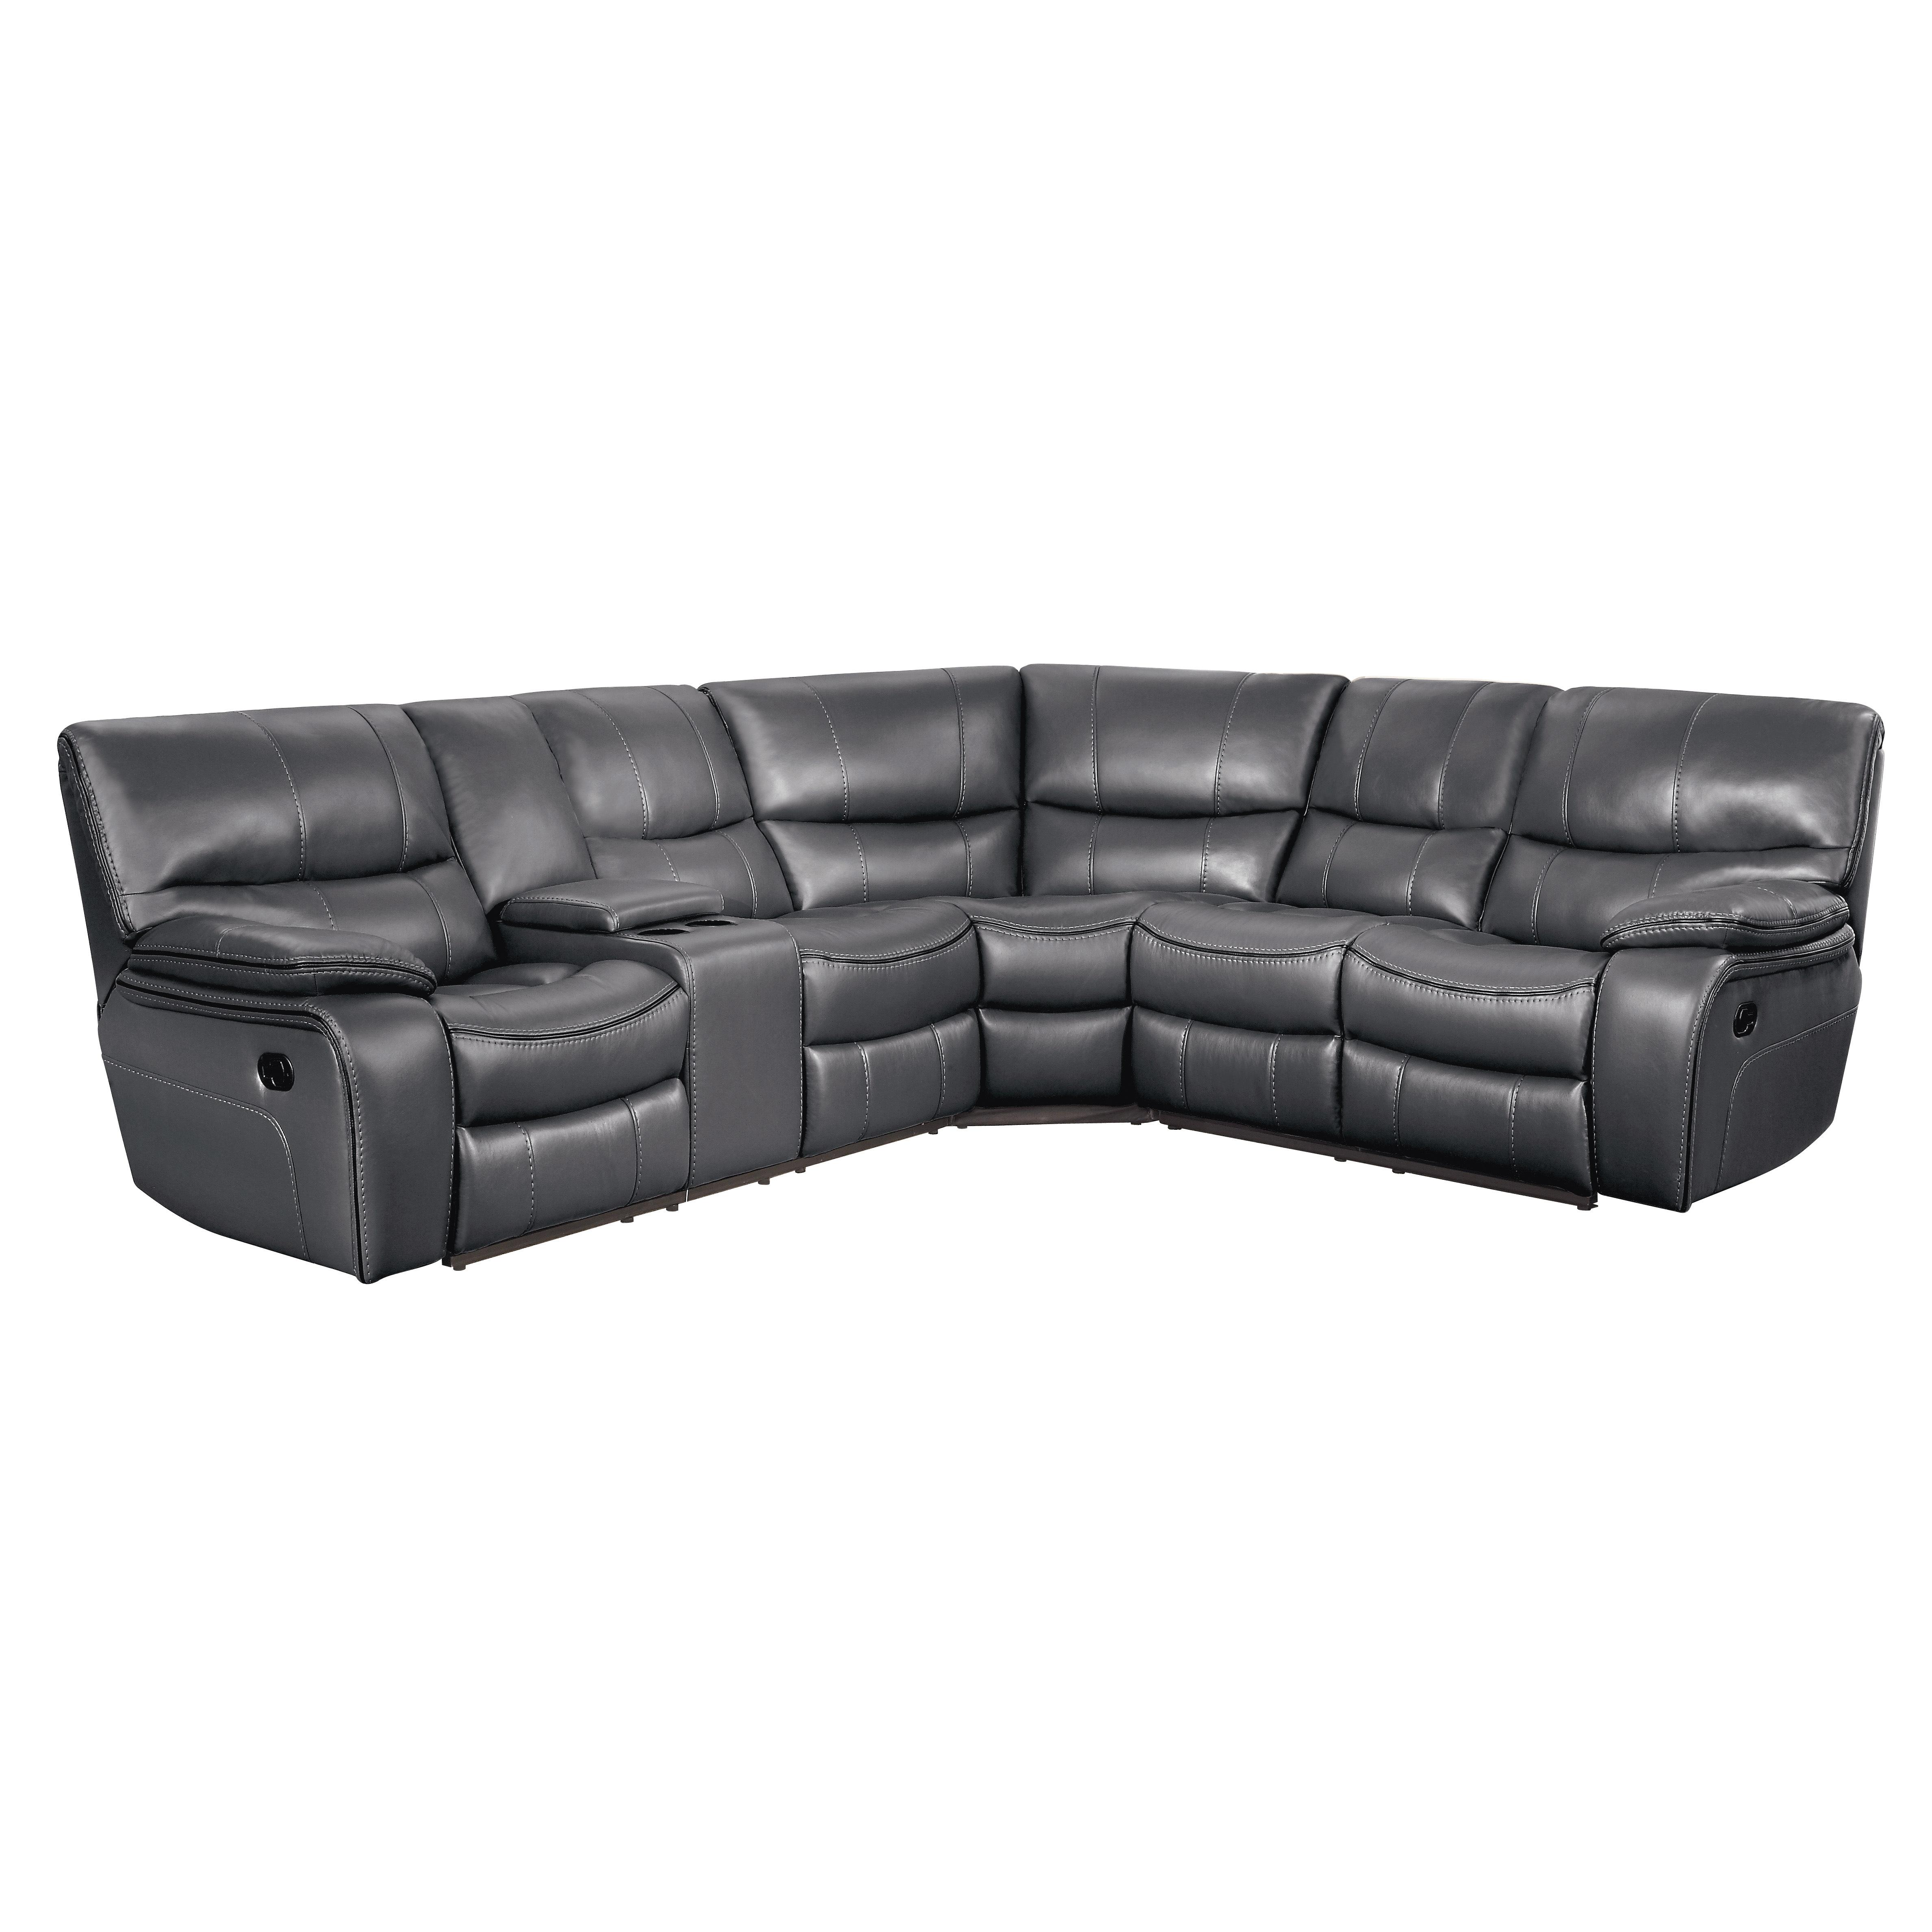 Modern Reclining Sectional 8480GRY*3SC Pecos 8480GRY*3SC in Gray Faux Leather